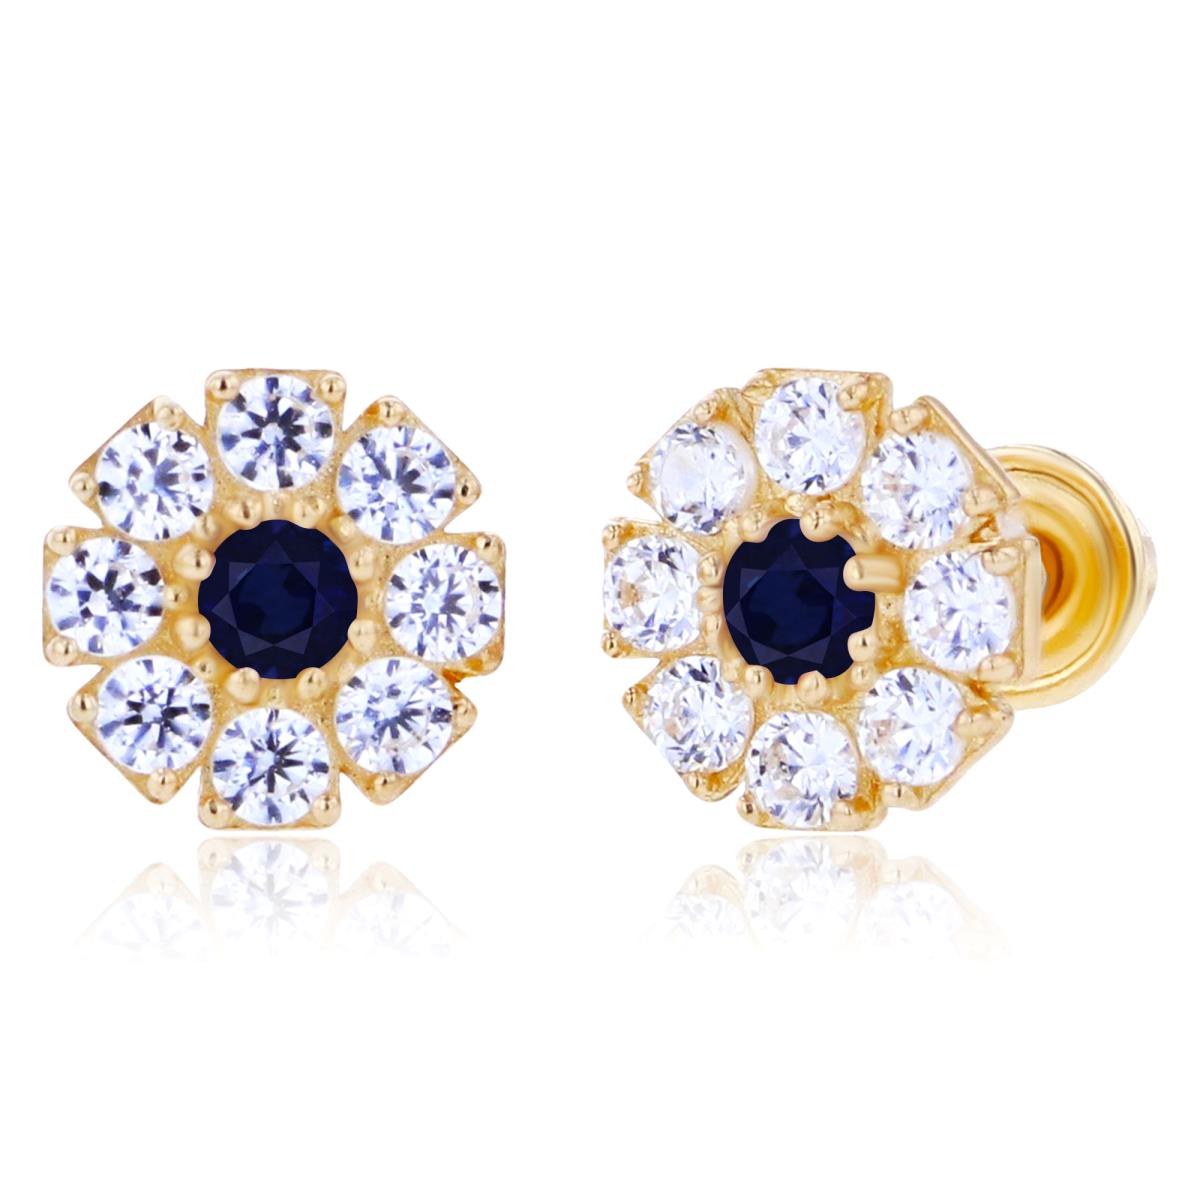 Sterling Silver Yellow 2mm Round Sapphire & 1.5mm Created White Sapphire Flower Screwback Earrings